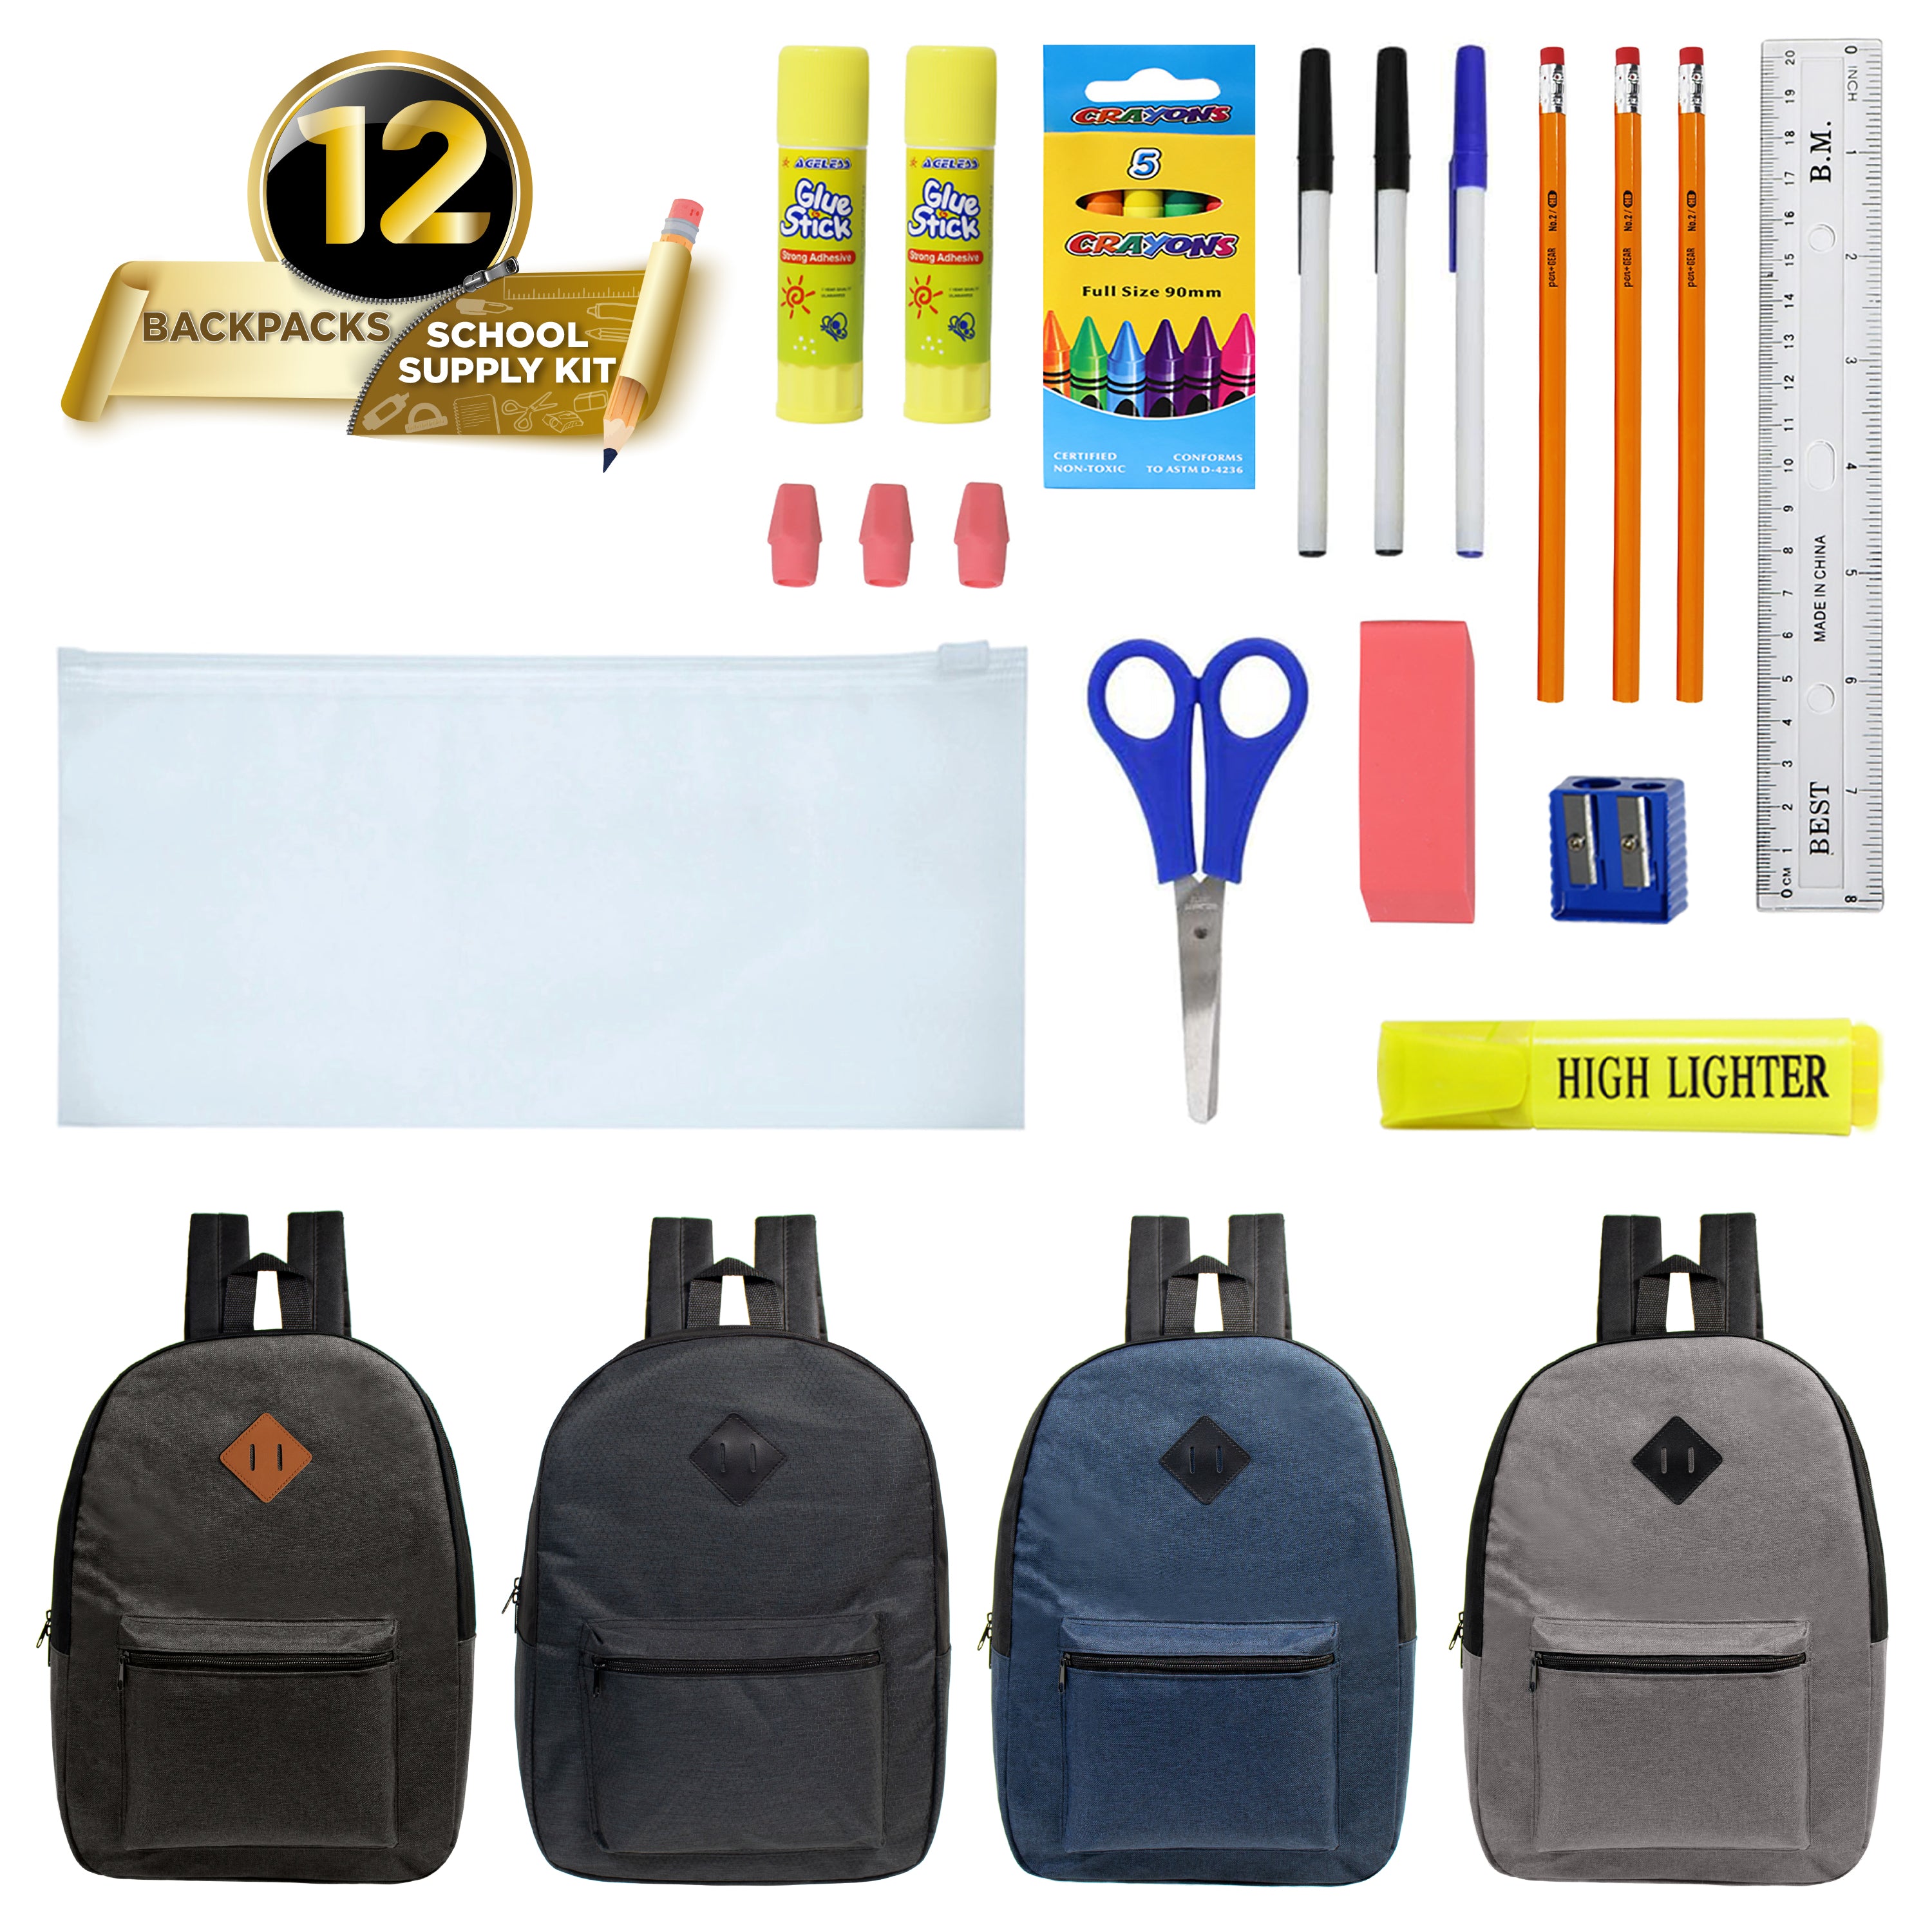 17-inch Bulk Backpack and School Supply Kit Combo Comes in 12 Assorted Colors and School Supply Kit